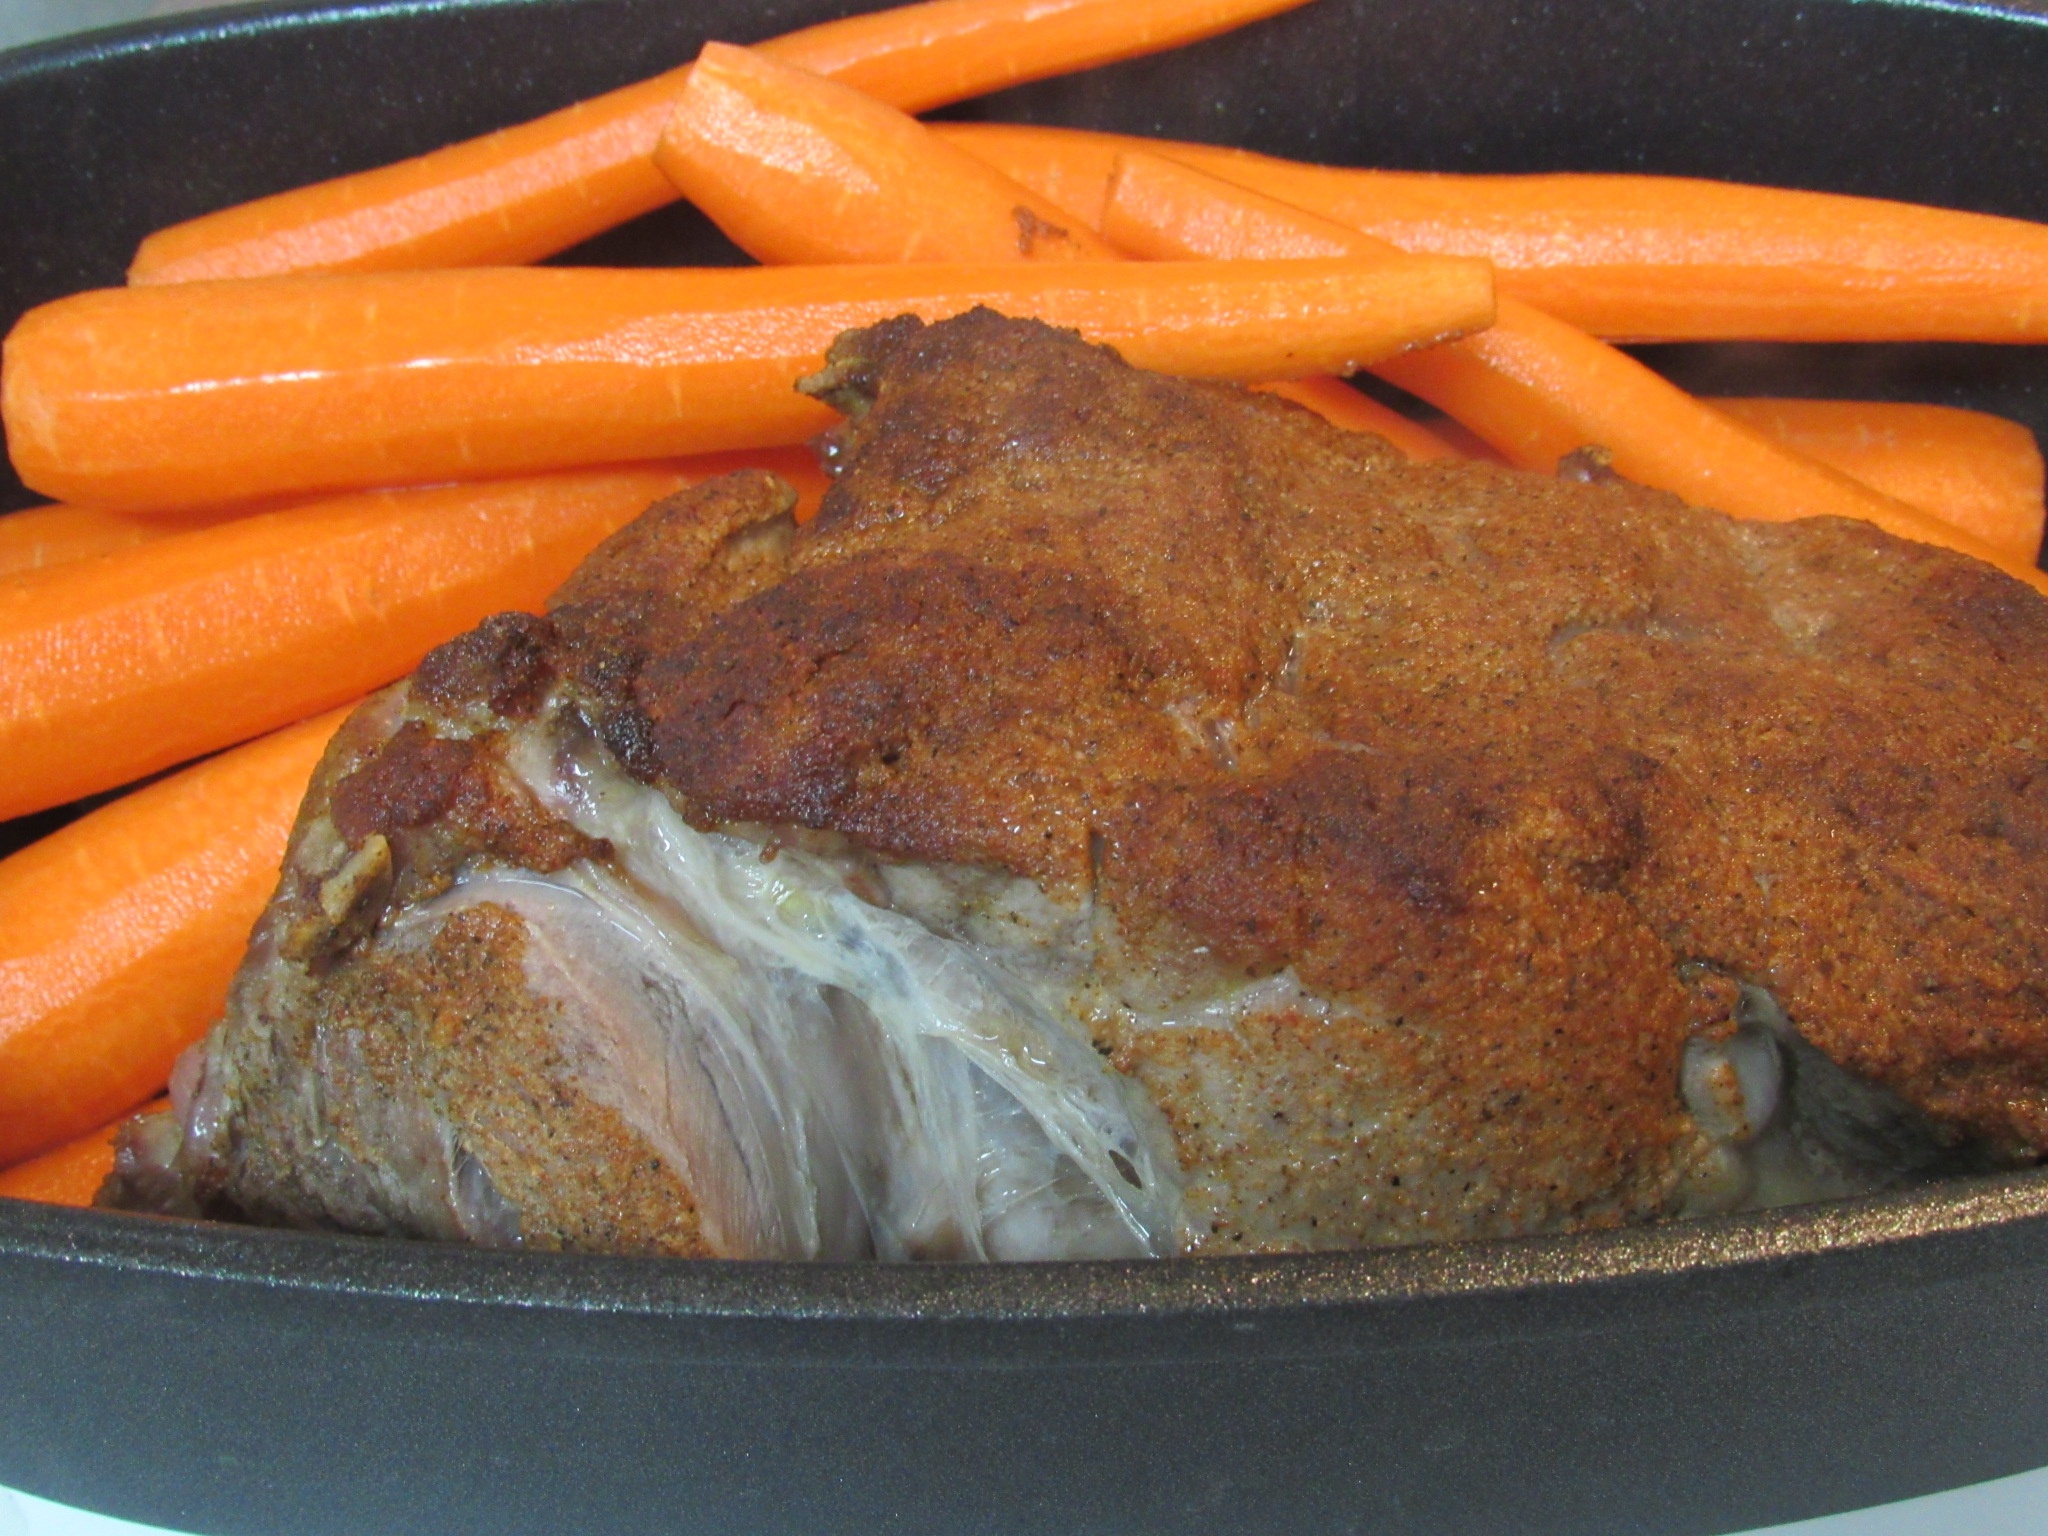 Prepare your carrots and dice or slice an onion to add and add both to your roaster then pop back in the oven for an hour.